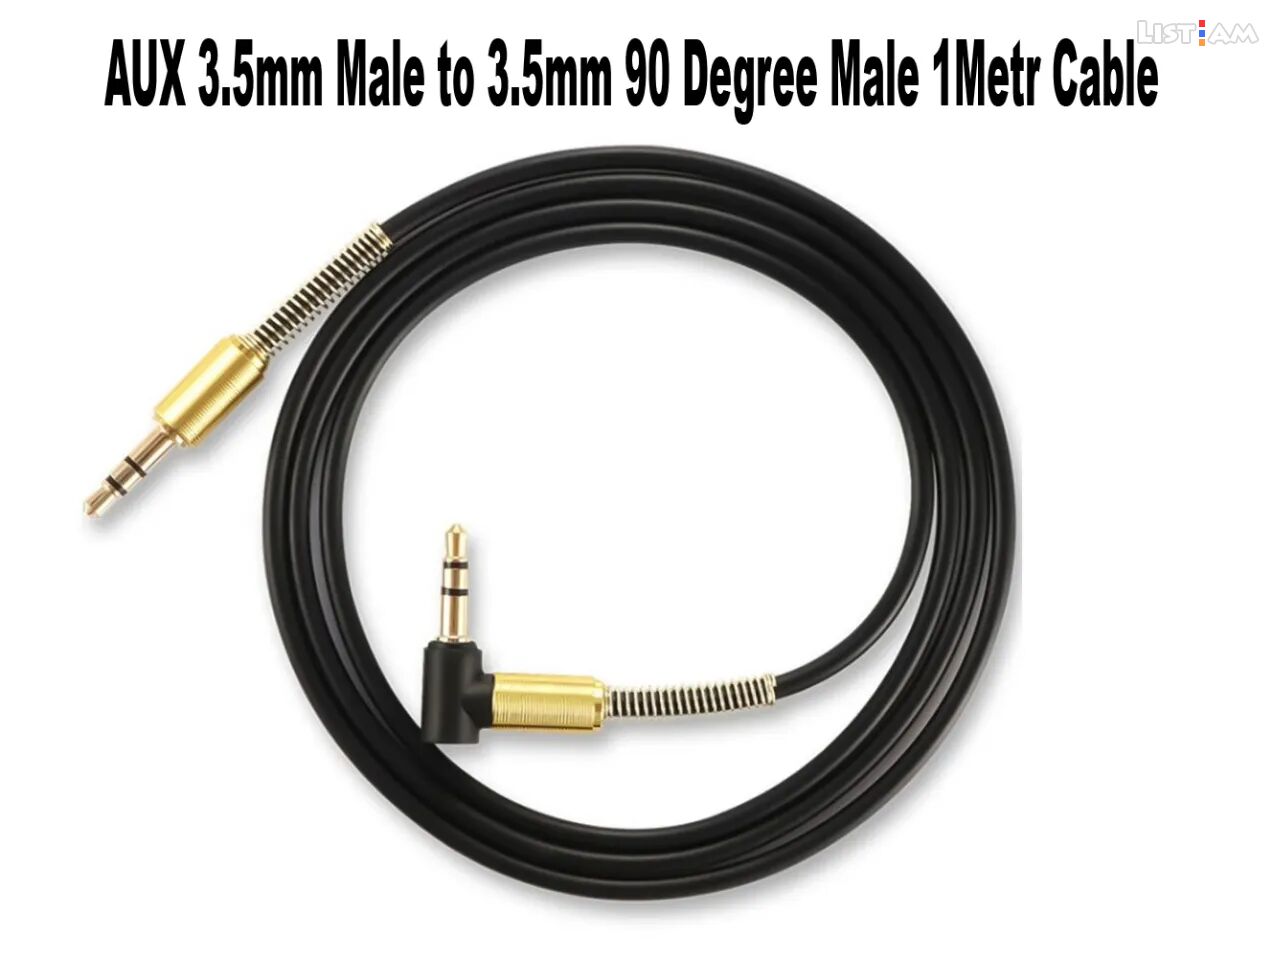 AUX 3.5mm Male to